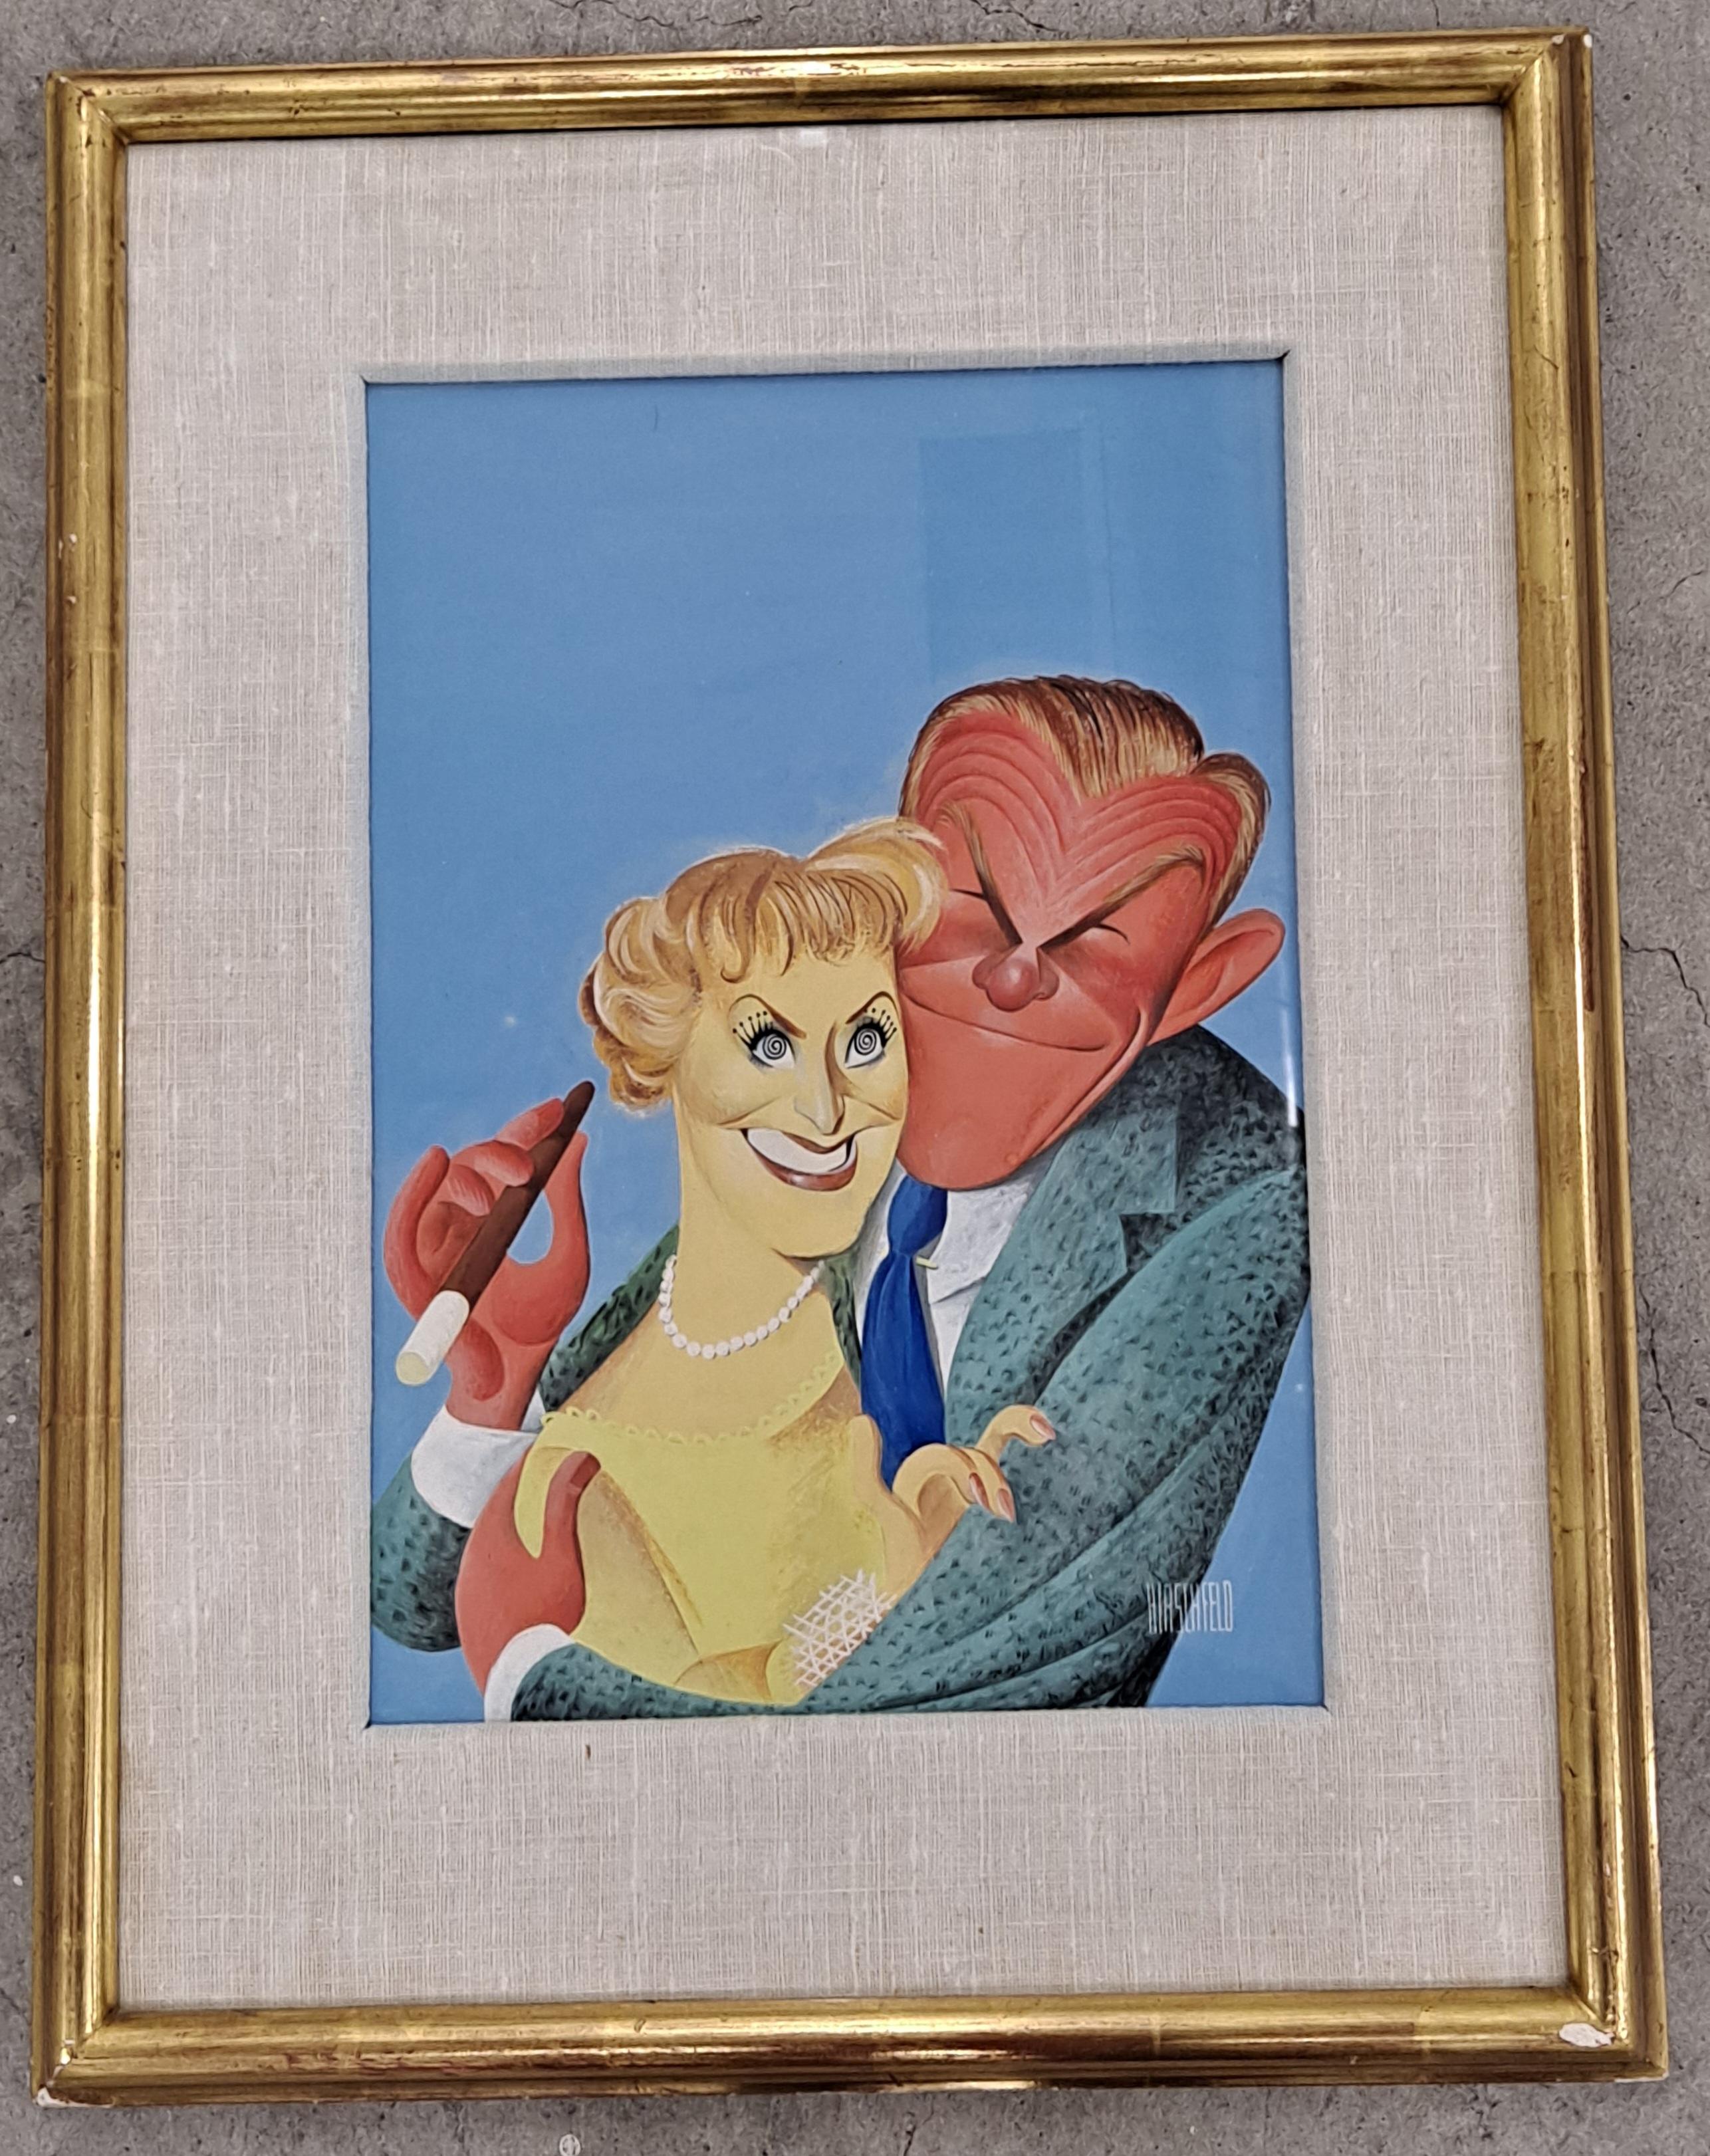 Unique painting by Al Hirschfield

Rare painting by Hirschfield in color

George Burns and Gracie Allen

World famous comedian and Vaudeville performer

17x25